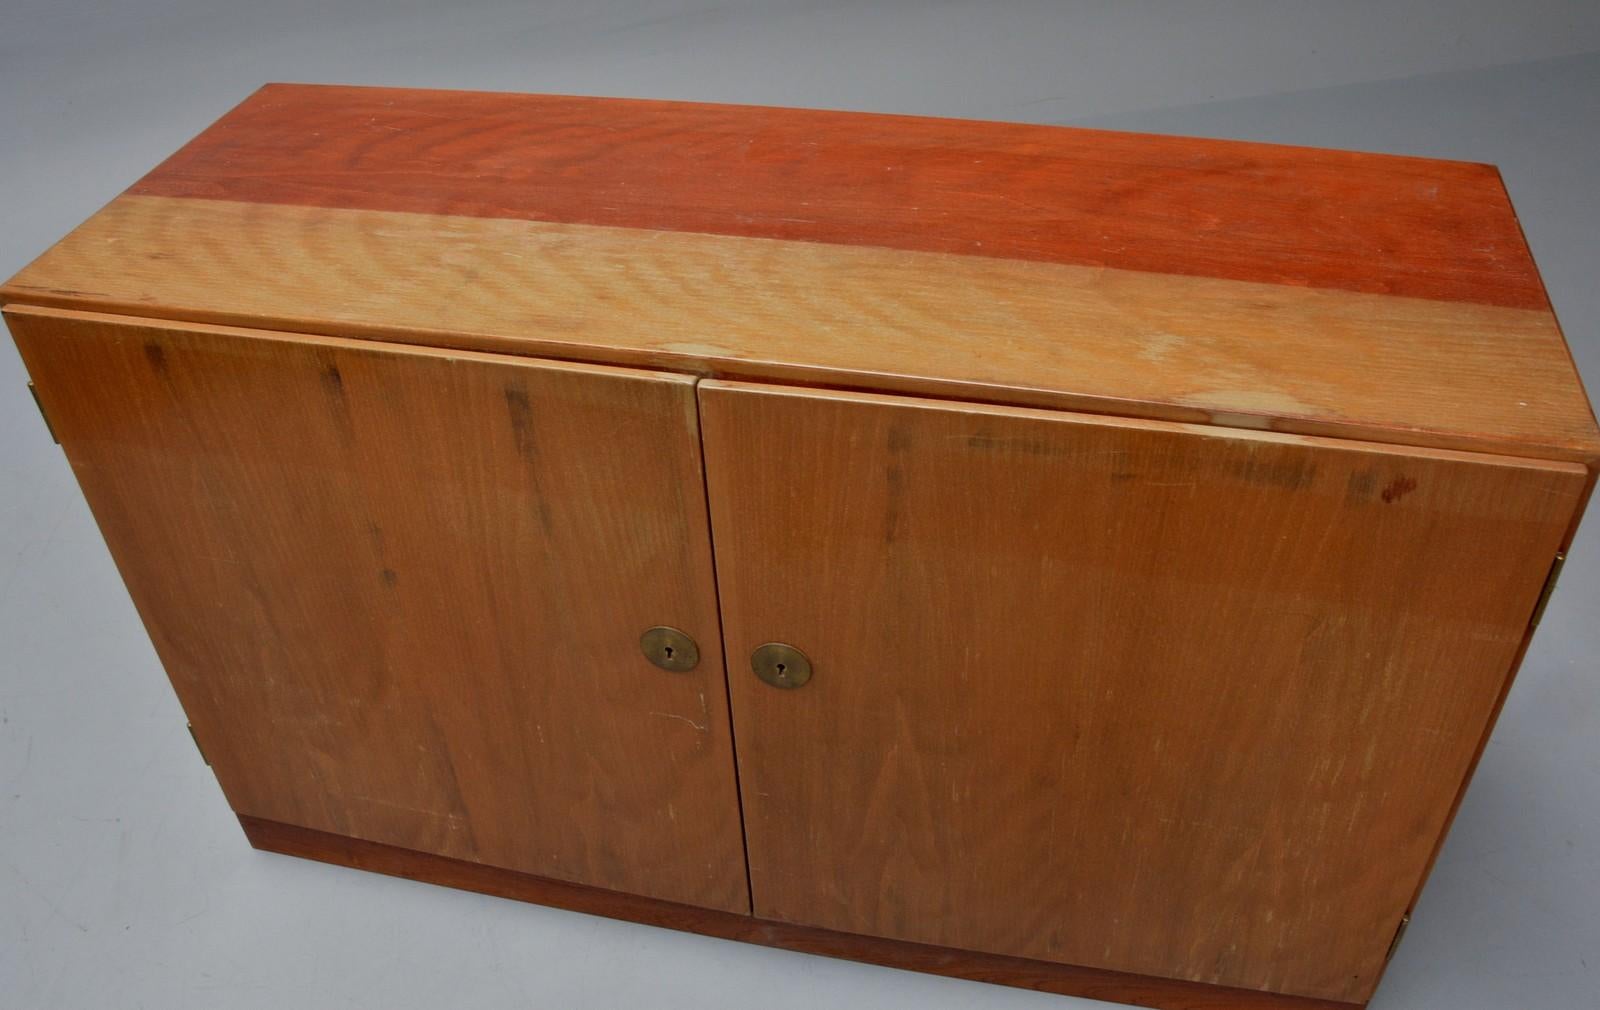 Rare Børge Mogensen model A 232 cabinet produced by C. M. Madsen for FDB, Denmark 1950’s. This cabinet is made out of teak and has two doors revealing an interior with shelves and pull-out trays made out of maple wood. Unfortunatelly missing keys.